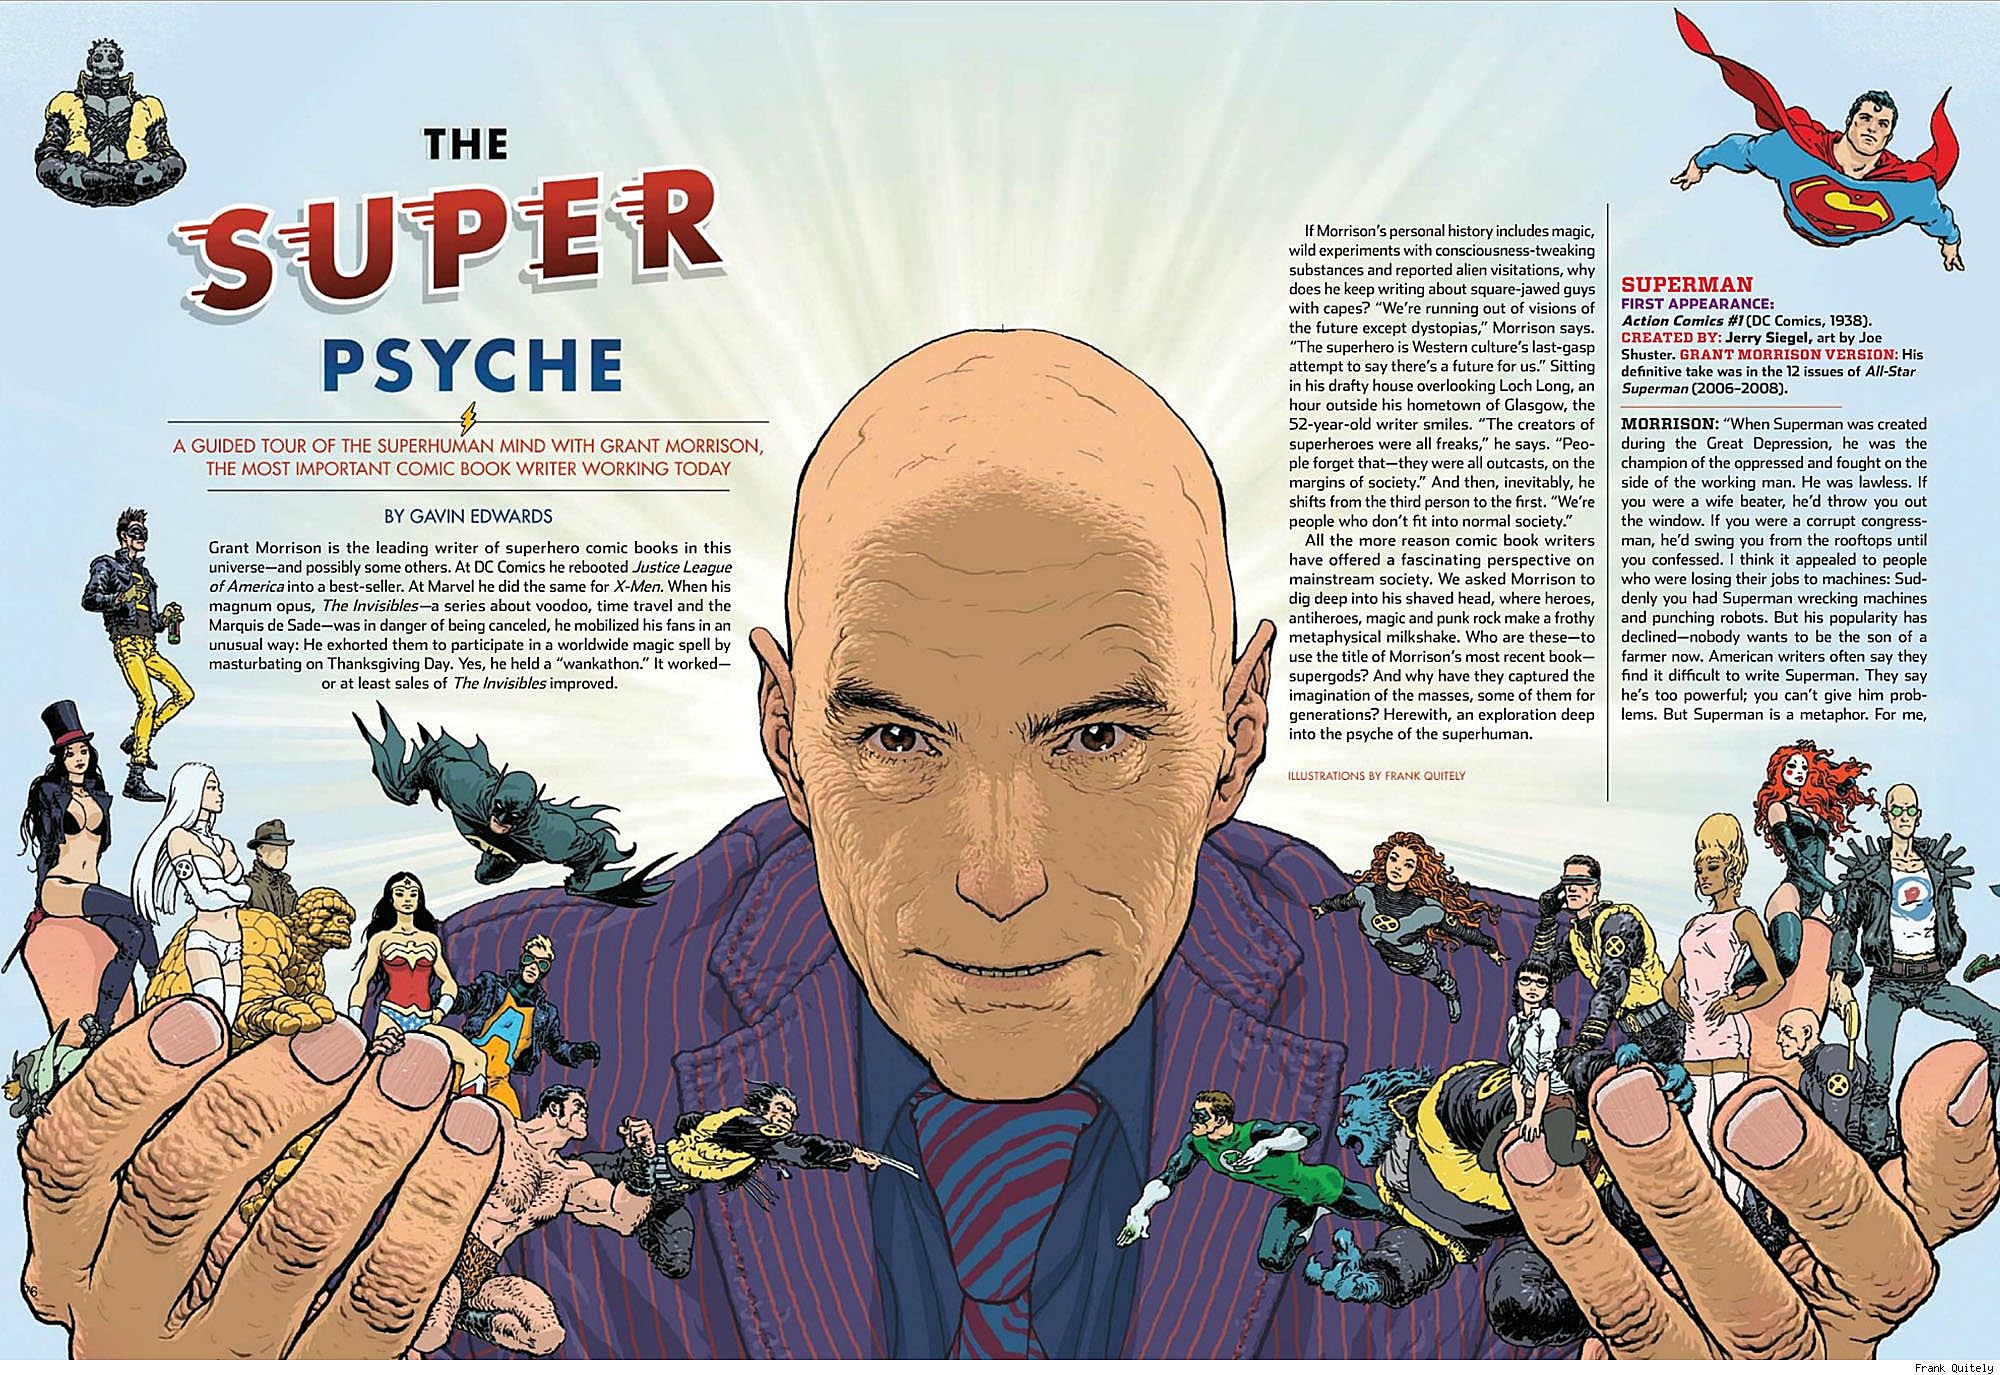 Grant Morrison Discusses Batman's Sexuality, His Wonder Woman Graphic Novel  in 'Playboy'